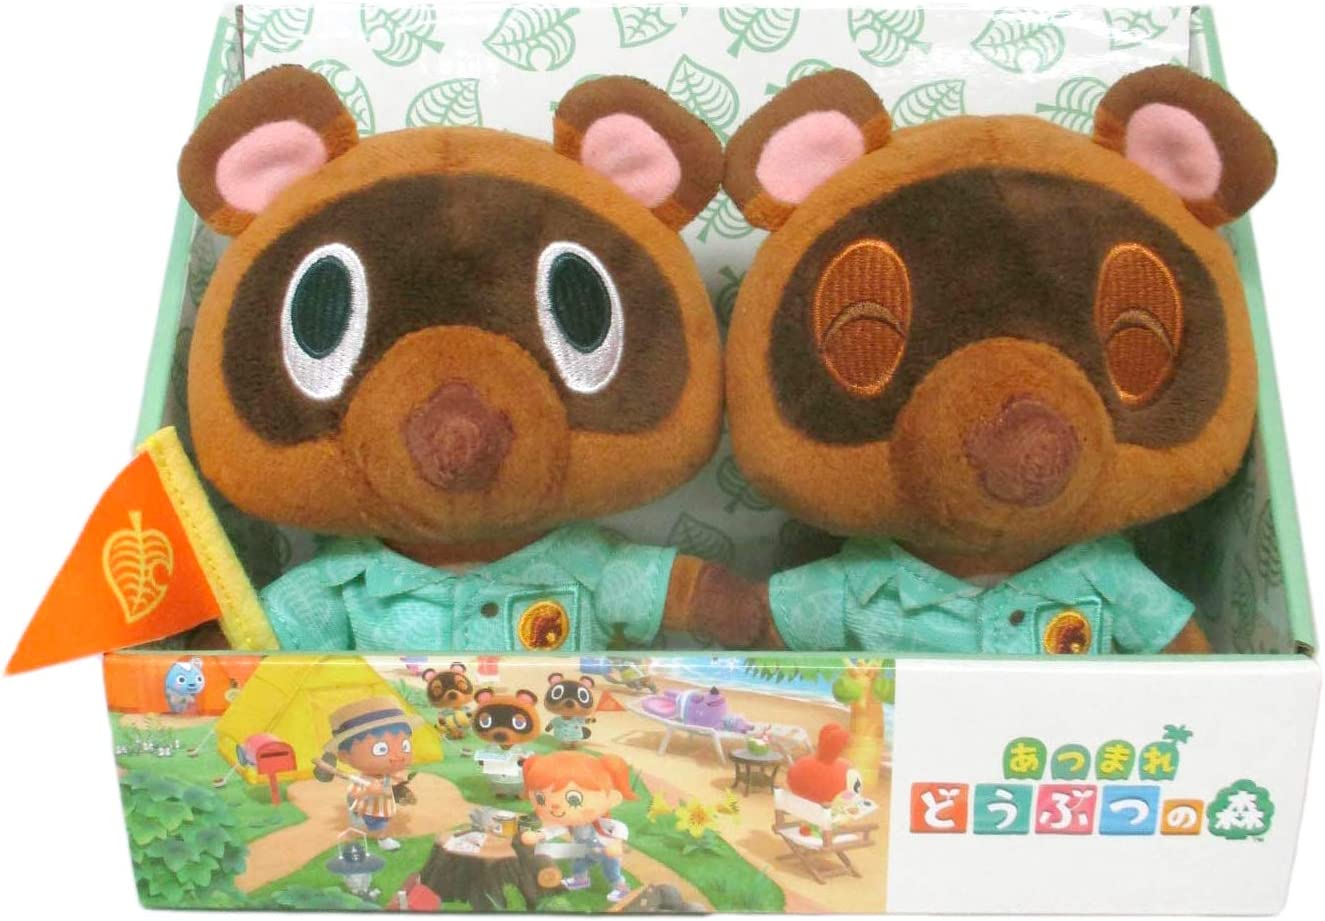 Little Buddy 1794 Animal Crossing - New Horizons - Timmy & Tommy Plush (Set of 2), 5.5" , Brown